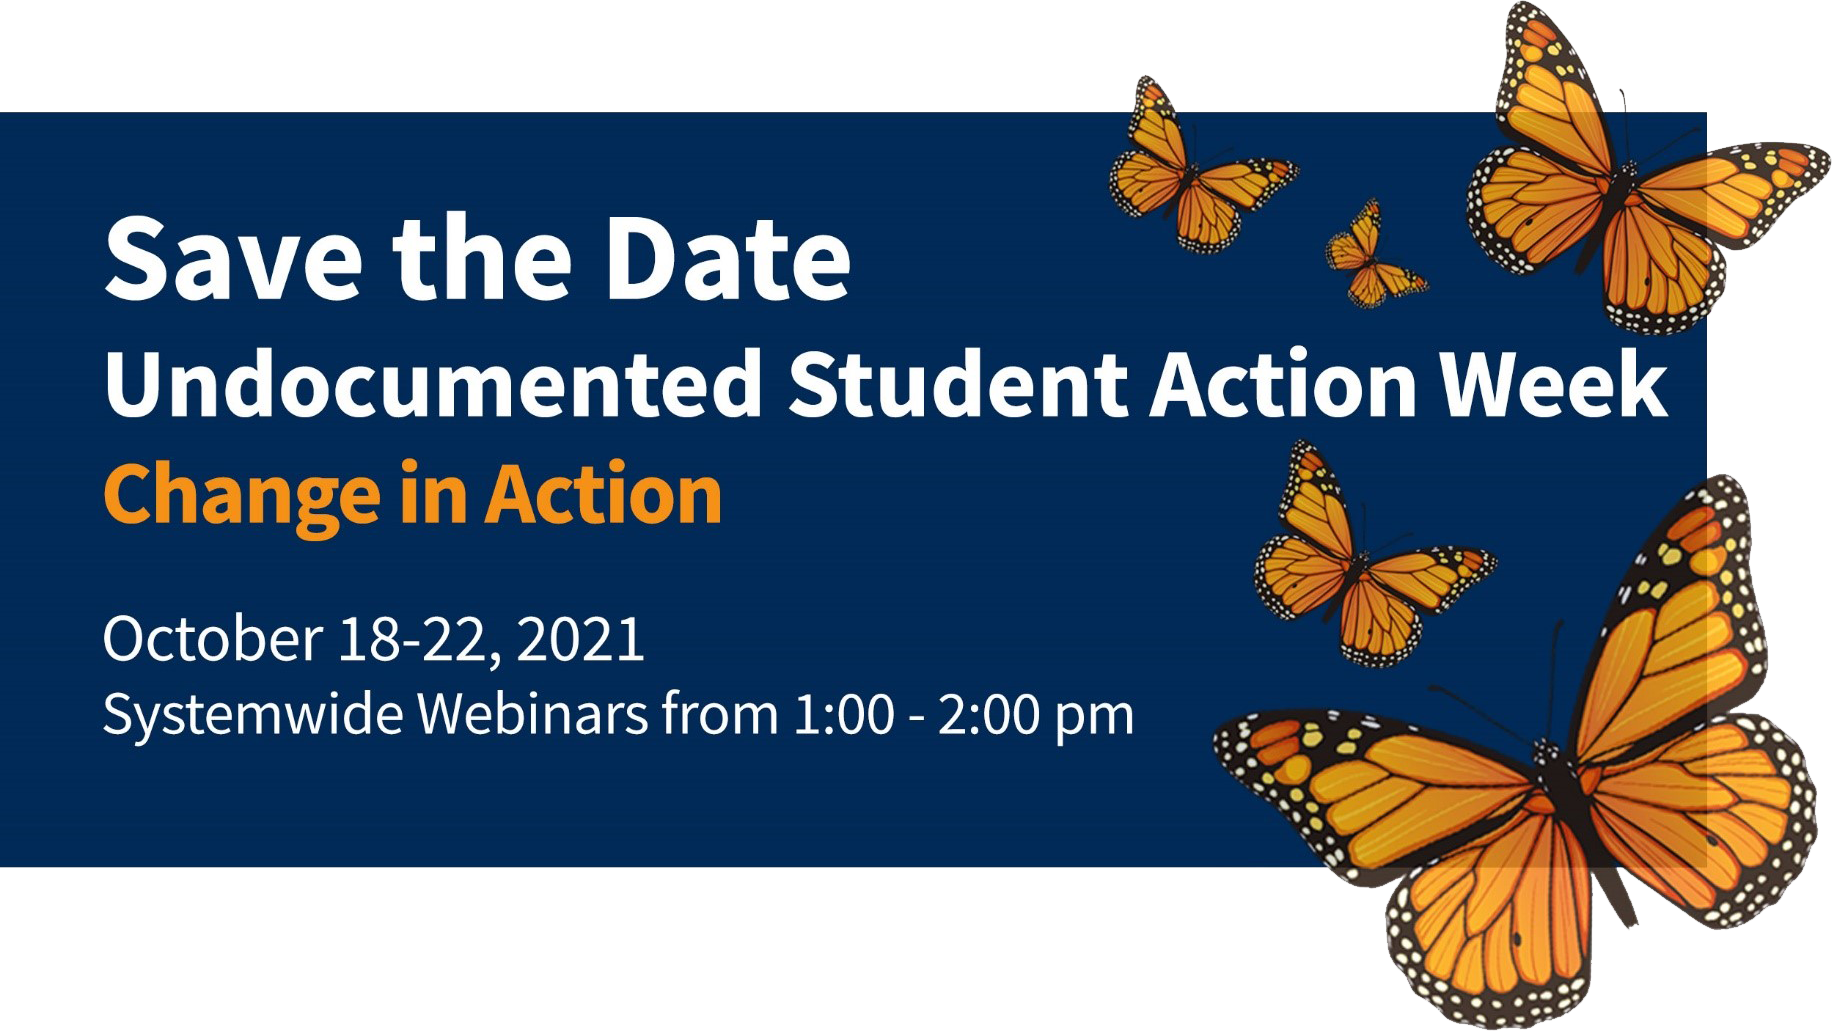 Undocumented Student Action Week 2020